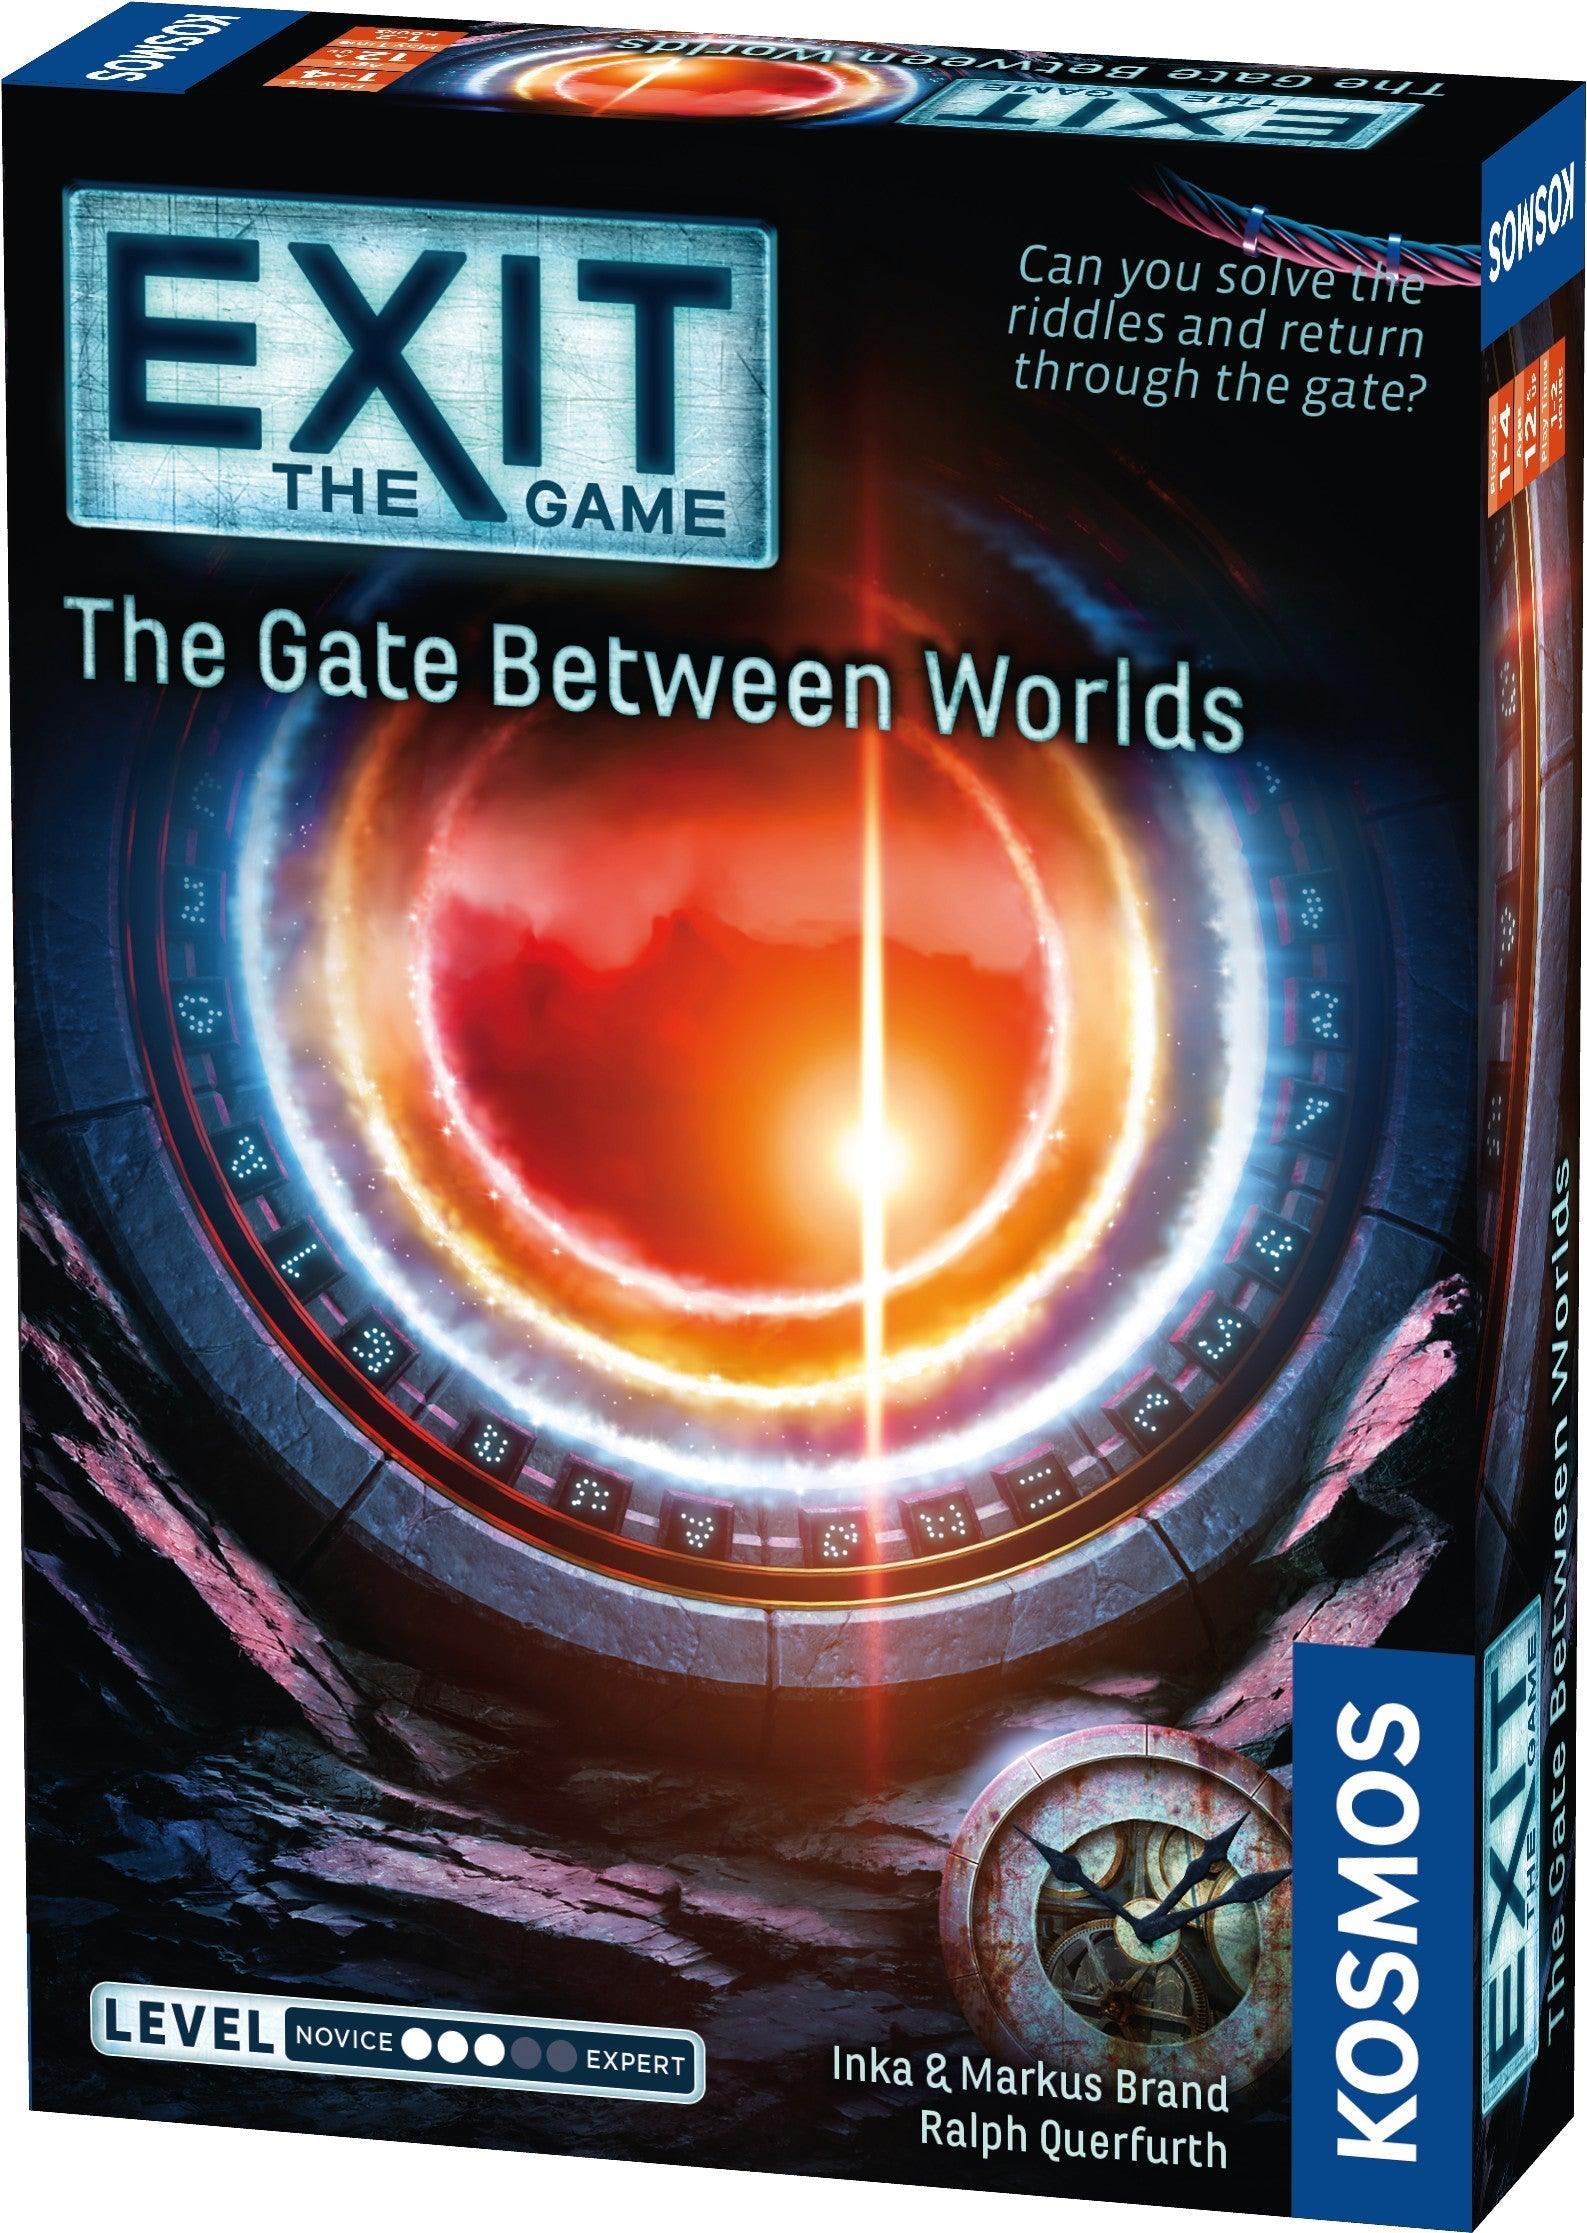 VR-88086 Exit the Game The Gate Between the Worlds - Kosmos - Titan Pop Culture